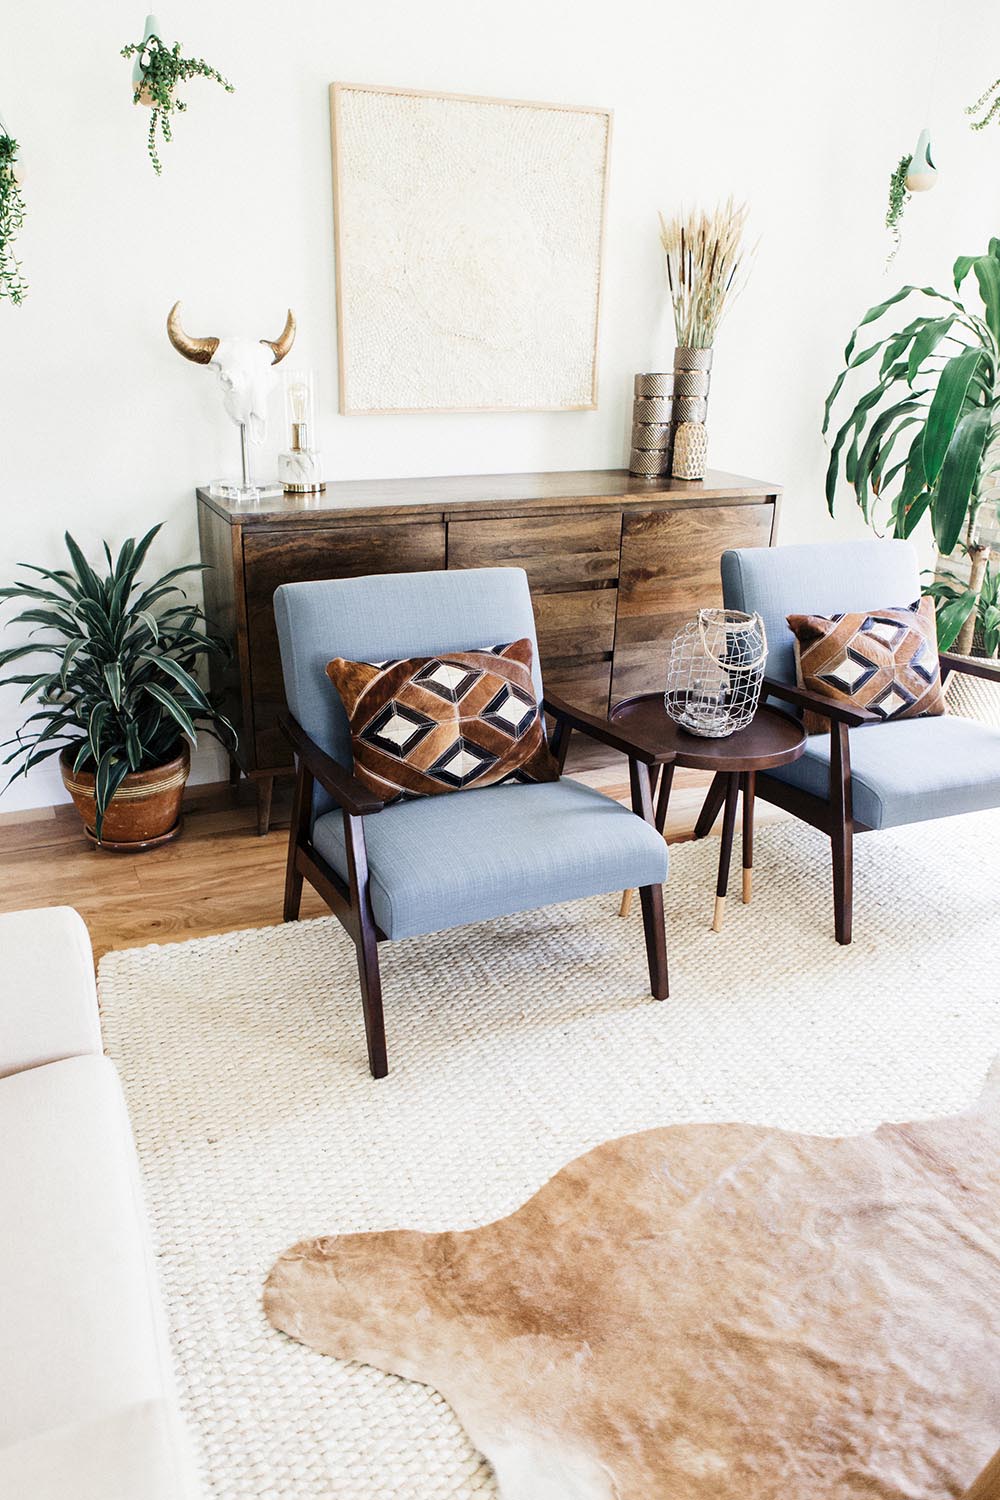 Family Room Makeover With a Mid-Century Modern Vibe - The Home Depot